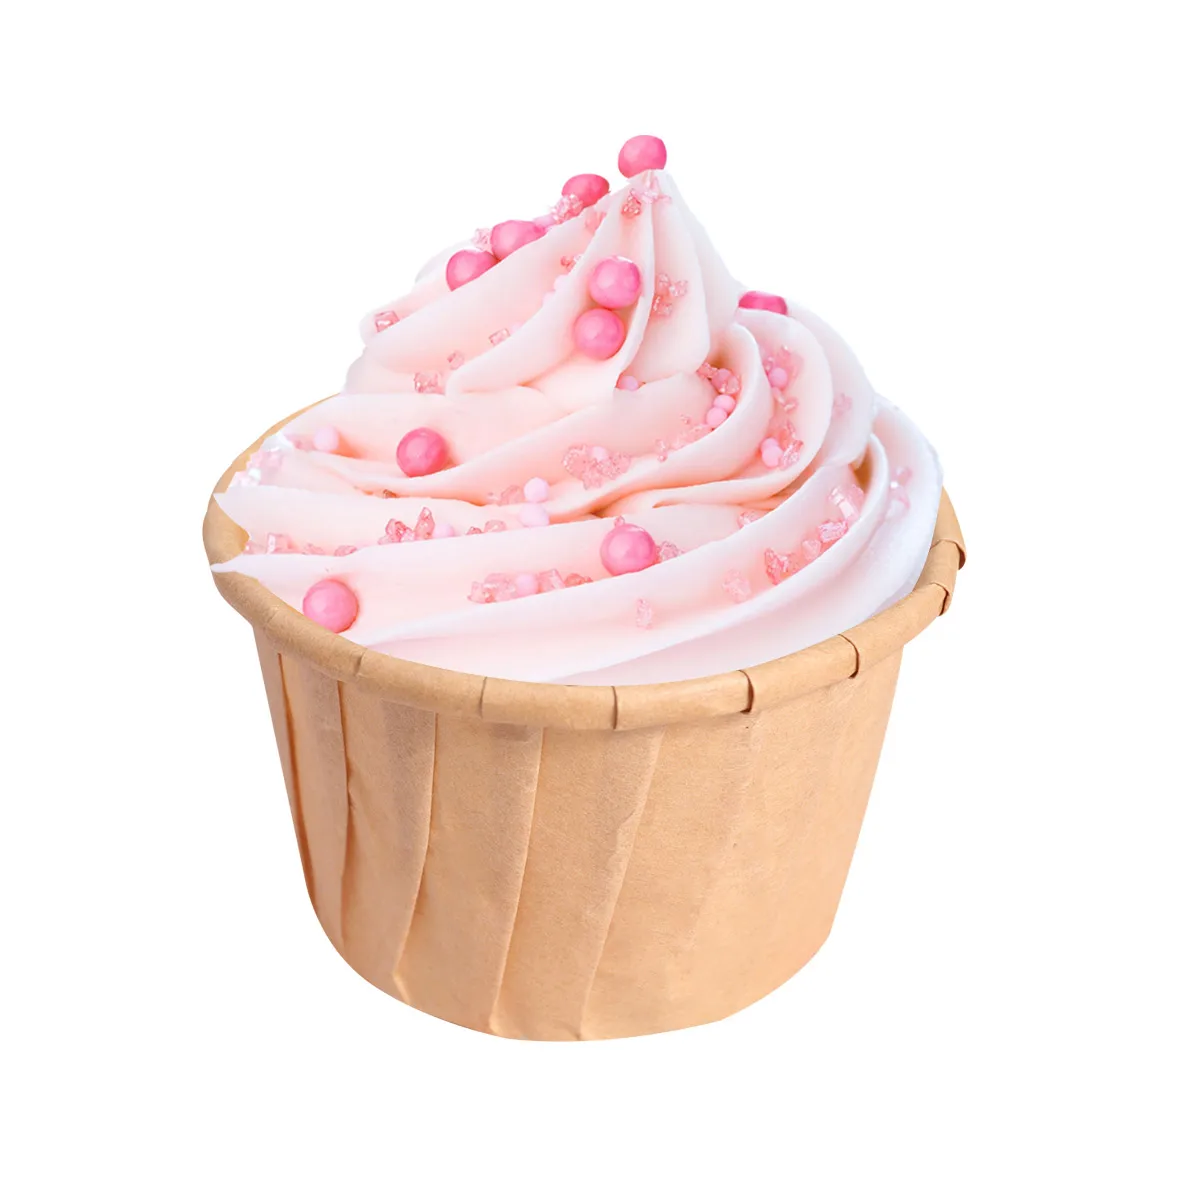 100pcs Disposable Curled Baking Cake Cups Heat-Resistant Paper Muffin Cupcake Paper Cups Baking Cupcake Wrappers Cake Wrapper